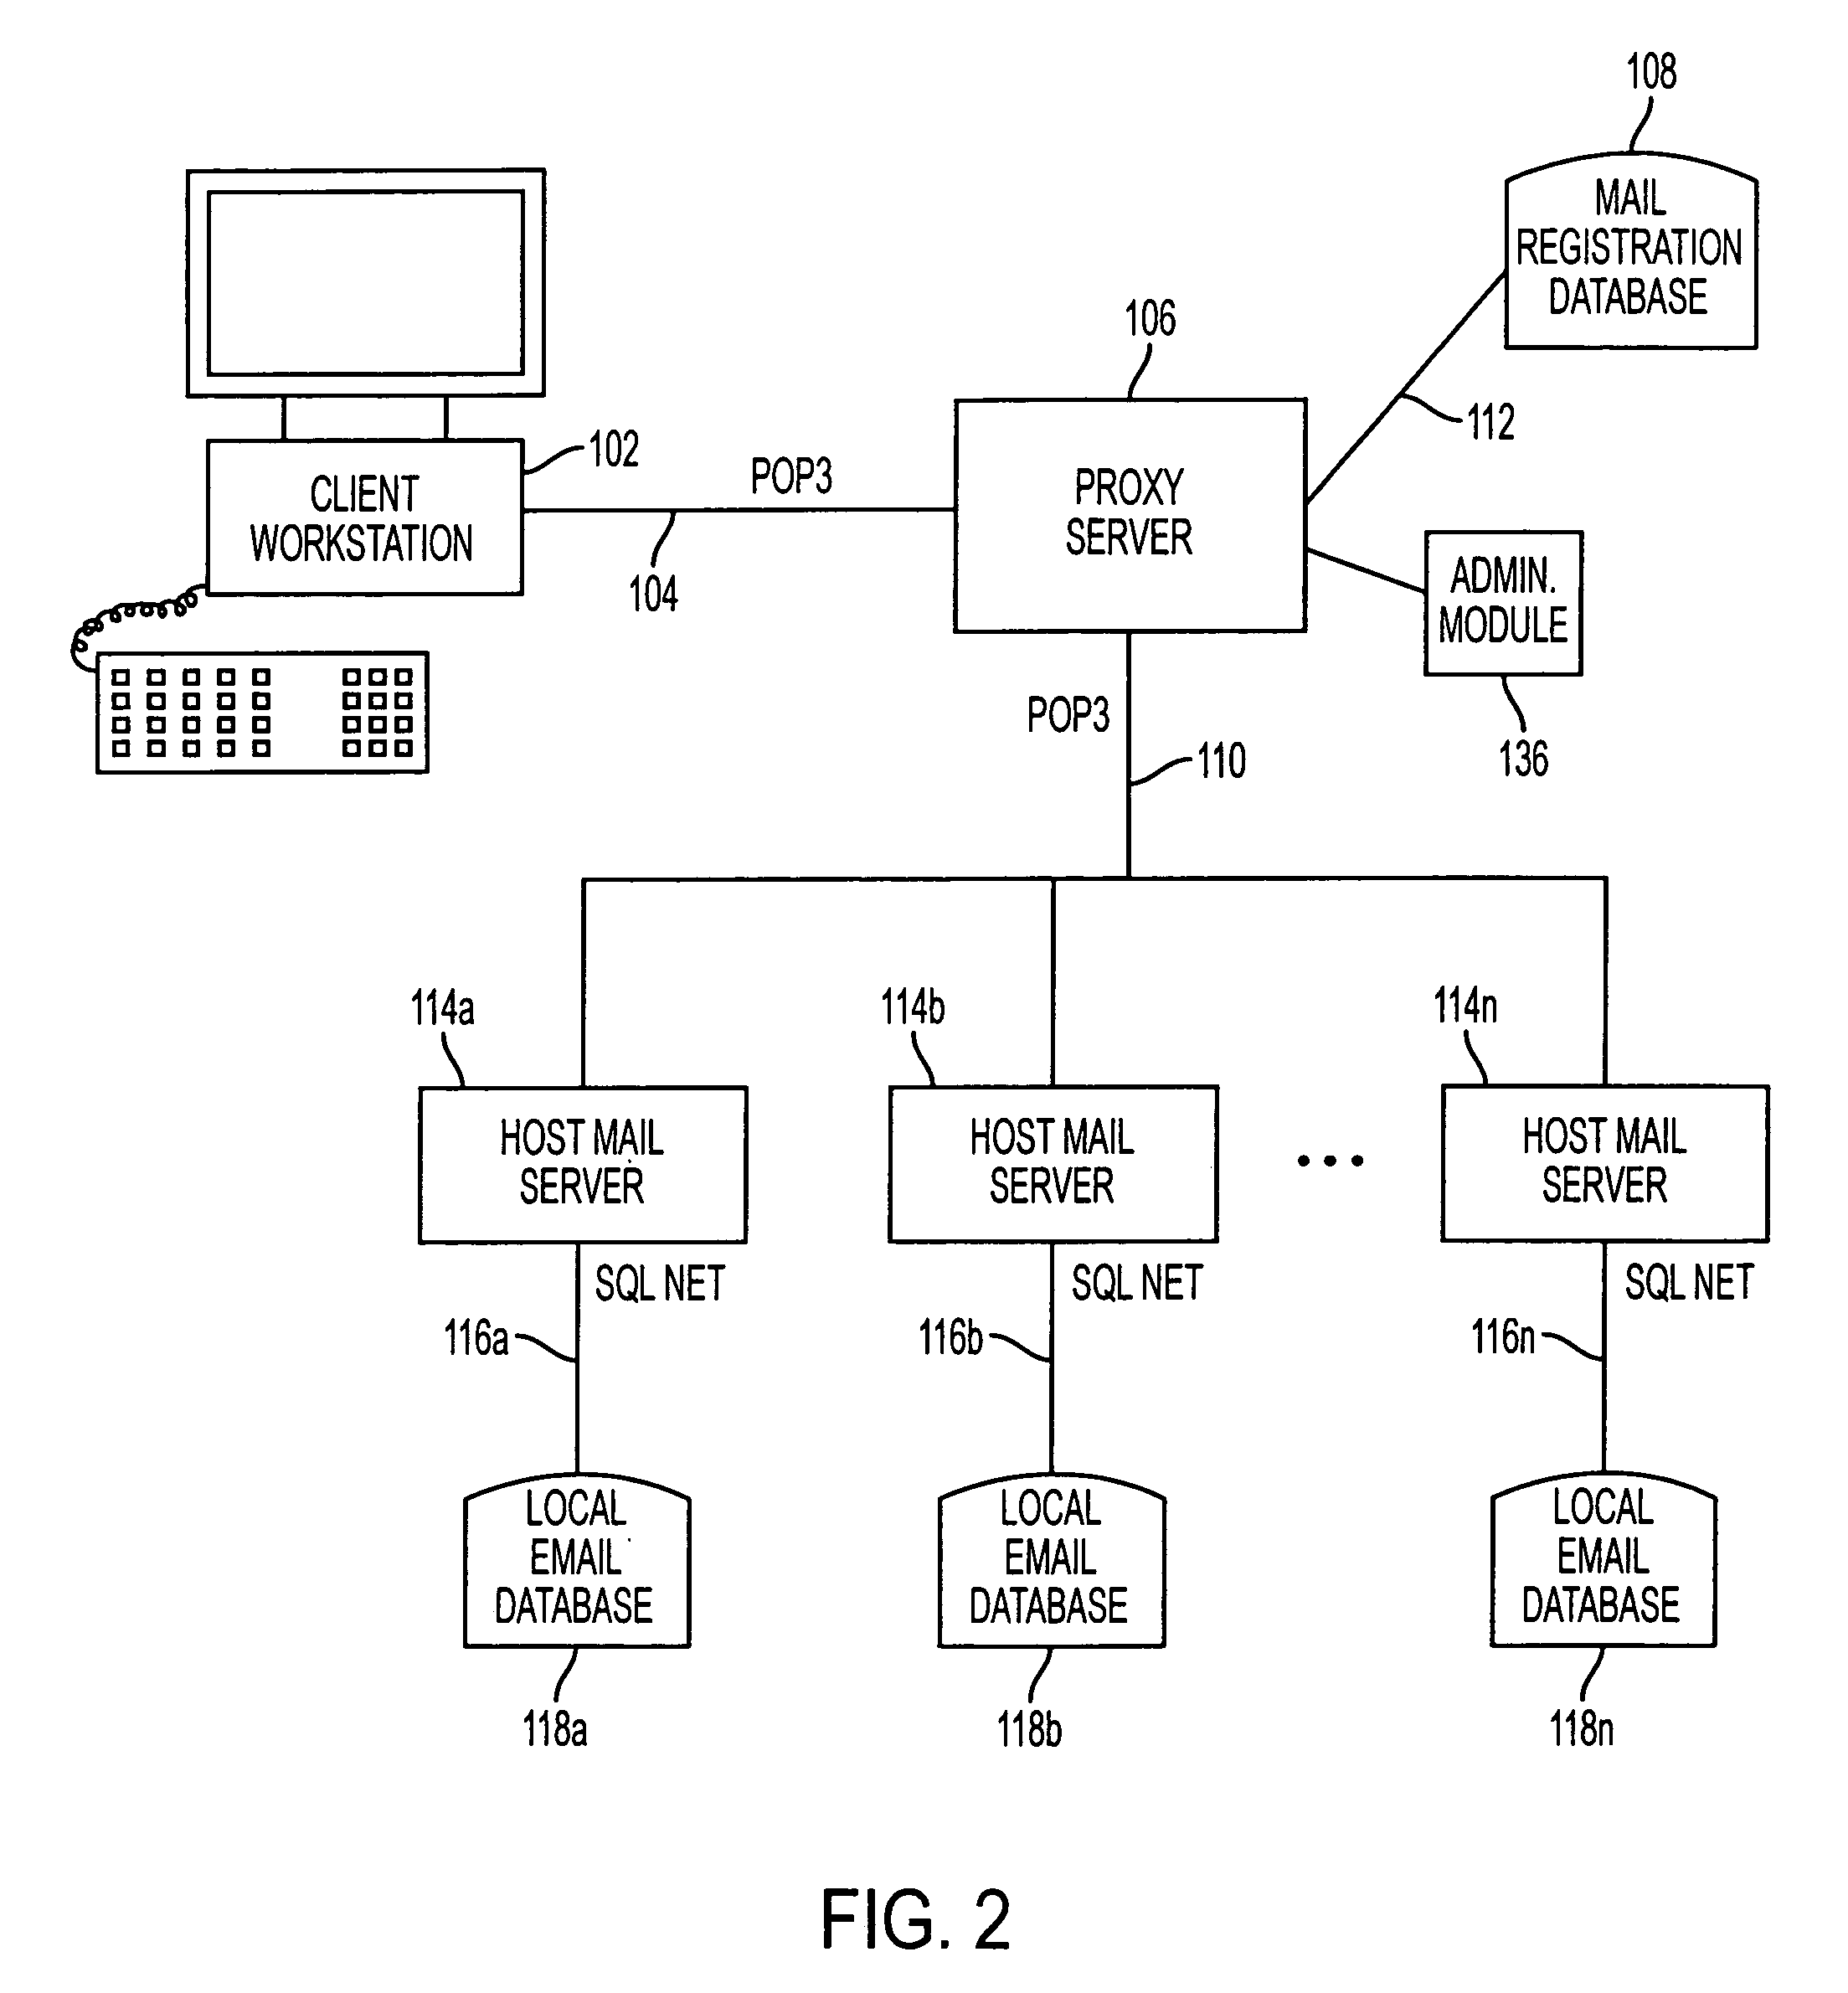 System and method for integrated management of electronic messages